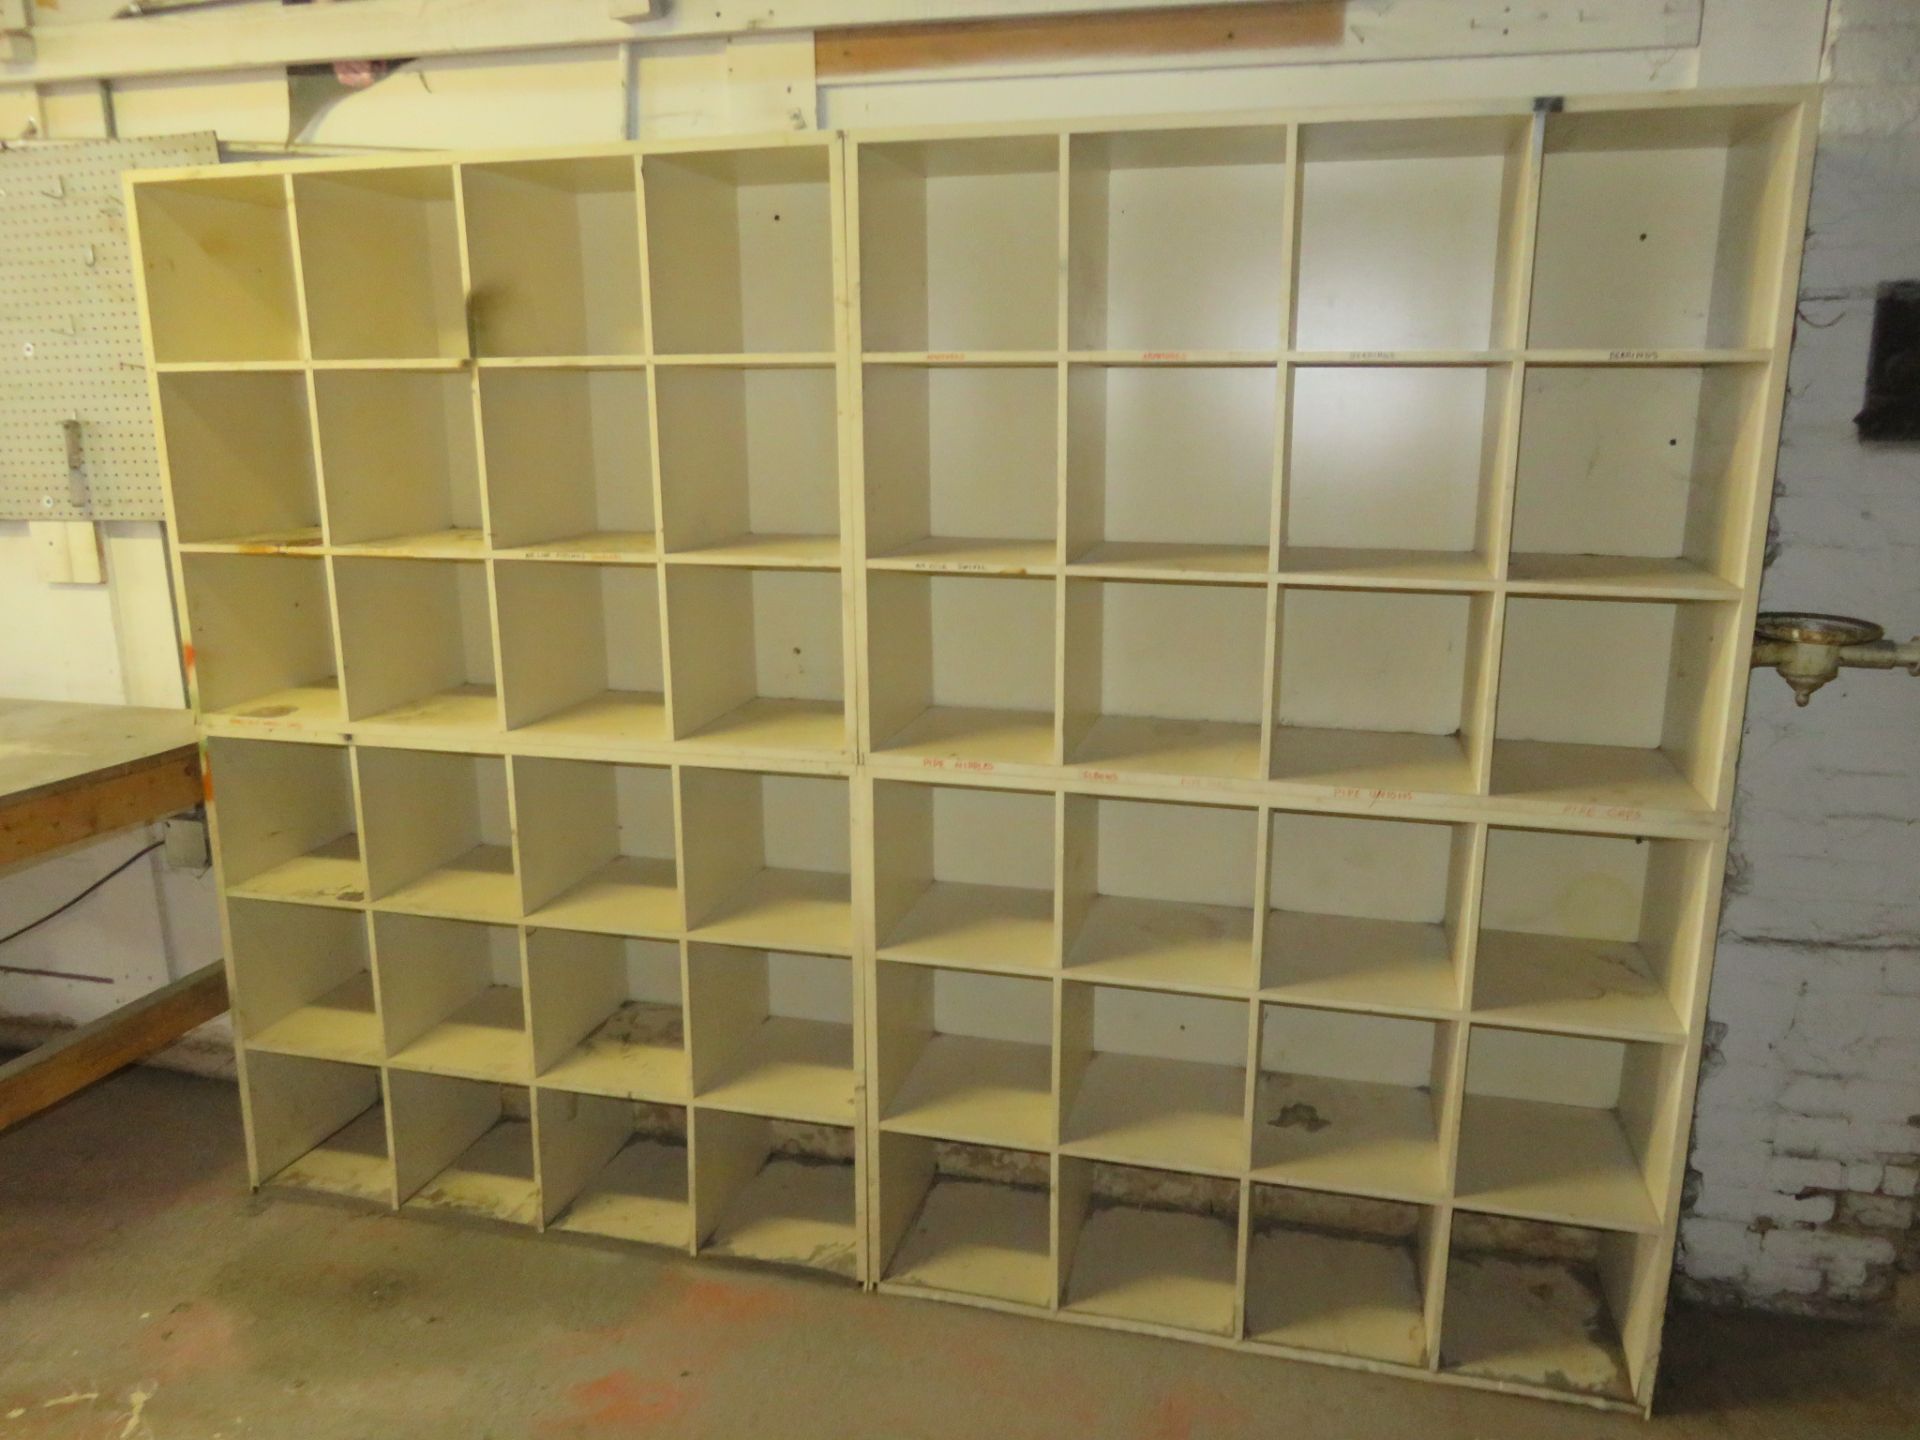 Lot of Cubed Storage Shelving approx 96"x 14" x 72" & Custom Work Table approx 172"x 36"x 35"